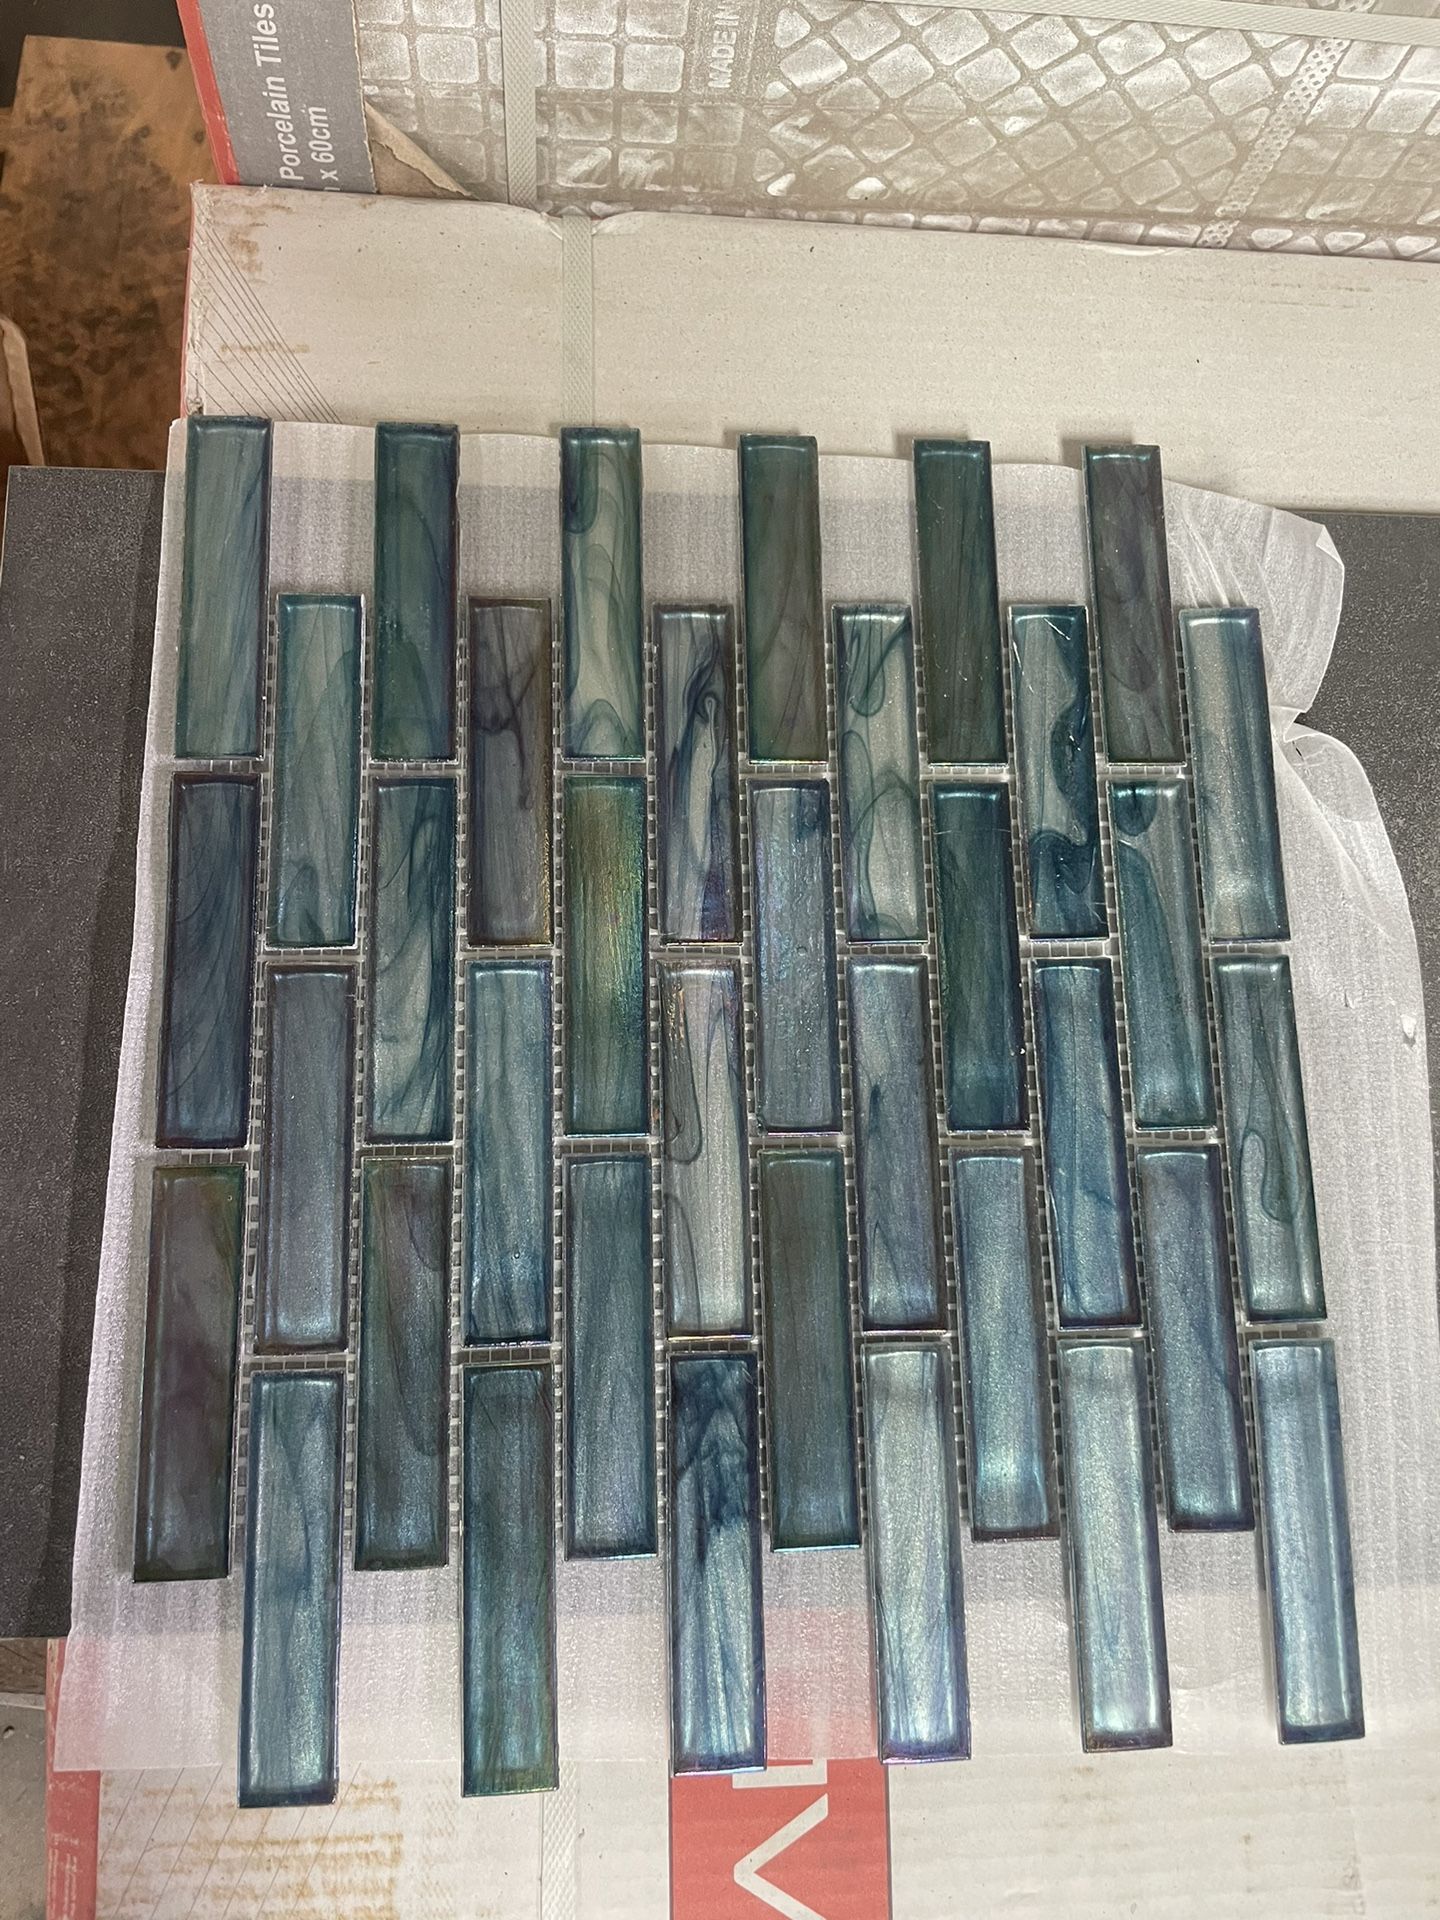 Clearance Pool Tile Glass Tile  1 x 4” water feature -spas fountain -kitchen backsplash, and shower walls. This glass mosaic tile  Hablamos Español 